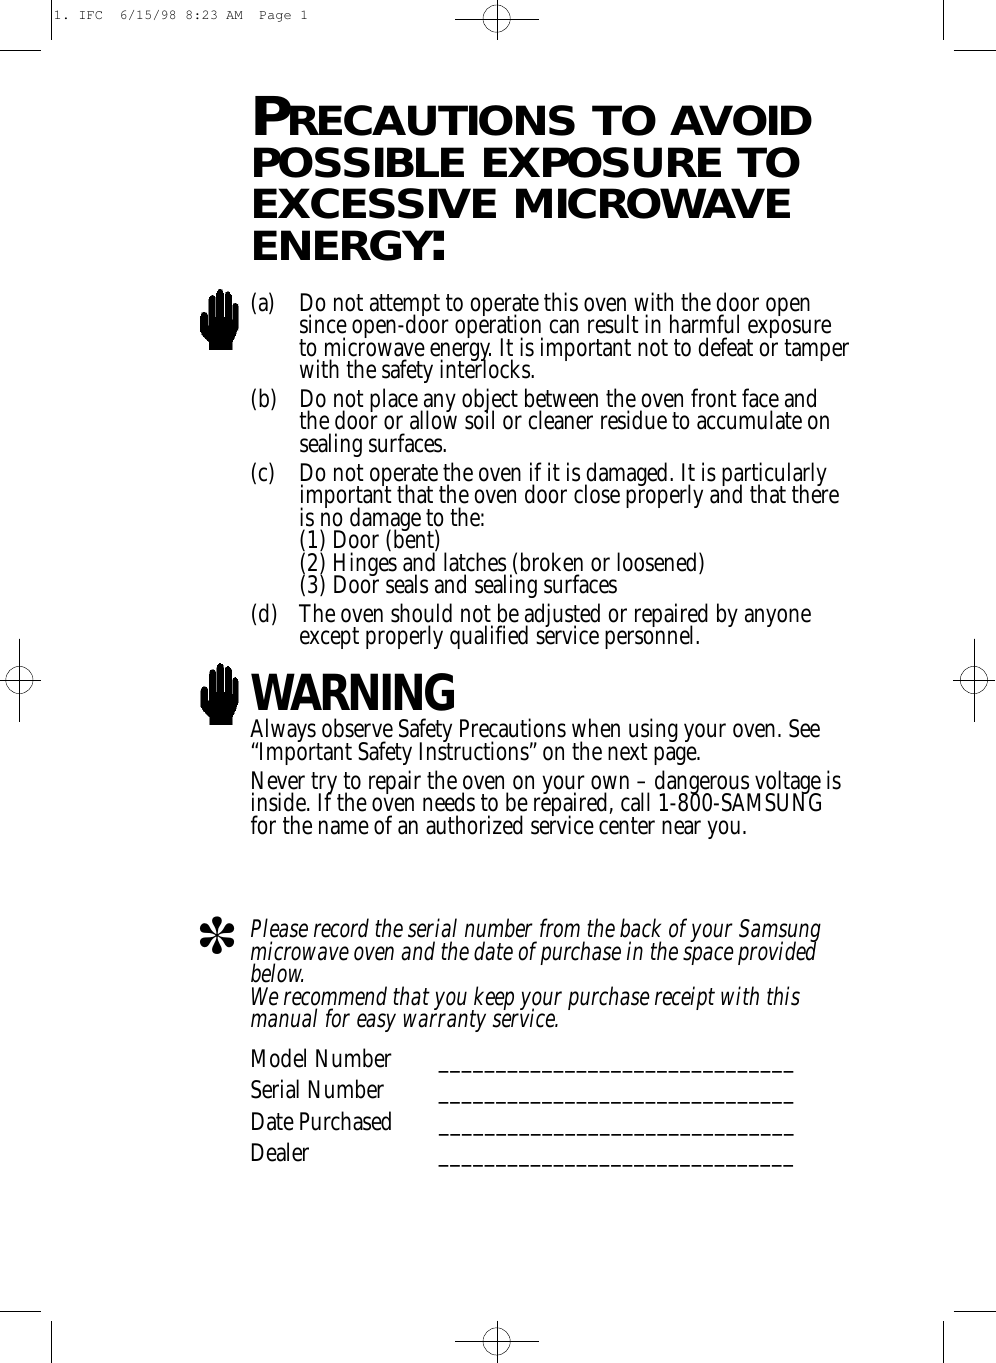 PRECAUTIONS TO AVOIDPOSSIBLE EXPOSURE TOEXCESSIVE MICROWAVEENERGY:(a) Do not attempt to operate this oven with the door opensince open-door operation can result in harmful exposureto microwave energy. It is important not to defeat or tamperwith the safety interlocks.(b) Do not place any object between the oven front face andthe door or allow soil or cleaner residue to accumulate onsealing surfaces.(c) Do not operate the oven if it is damaged. It is particularlyimportant that the oven door close properly and that thereis no damage to the:(1) Door (bent)(2) Hinges and latches (broken or loosened)(3) Door seals and sealing surfaces(d) The oven should not be adjusted or repaired by anyoneexcept properly qualified service personnel.WARNINGAlways observe Safety Precautions when using your oven. See“Important Safety Instructions” on the next page.Never try to repair the oven on your own – dangerous voltage isinside. If the oven needs to be repaired, call 1-800-SAMSUNGfor the name of an authorized service center near you.Please record the serial number from the back of your Samsungmicrowave oven and the date of purchase in the space providedbelow. We recommend that you keep your purchase receipt with thismanual for easy warranty service. Model Number _______________________________Serial Number _______________________________Date Purchased _______________________________Dealer _______________________________T1. IFC  6/15/98 8:23 AM  Page 1